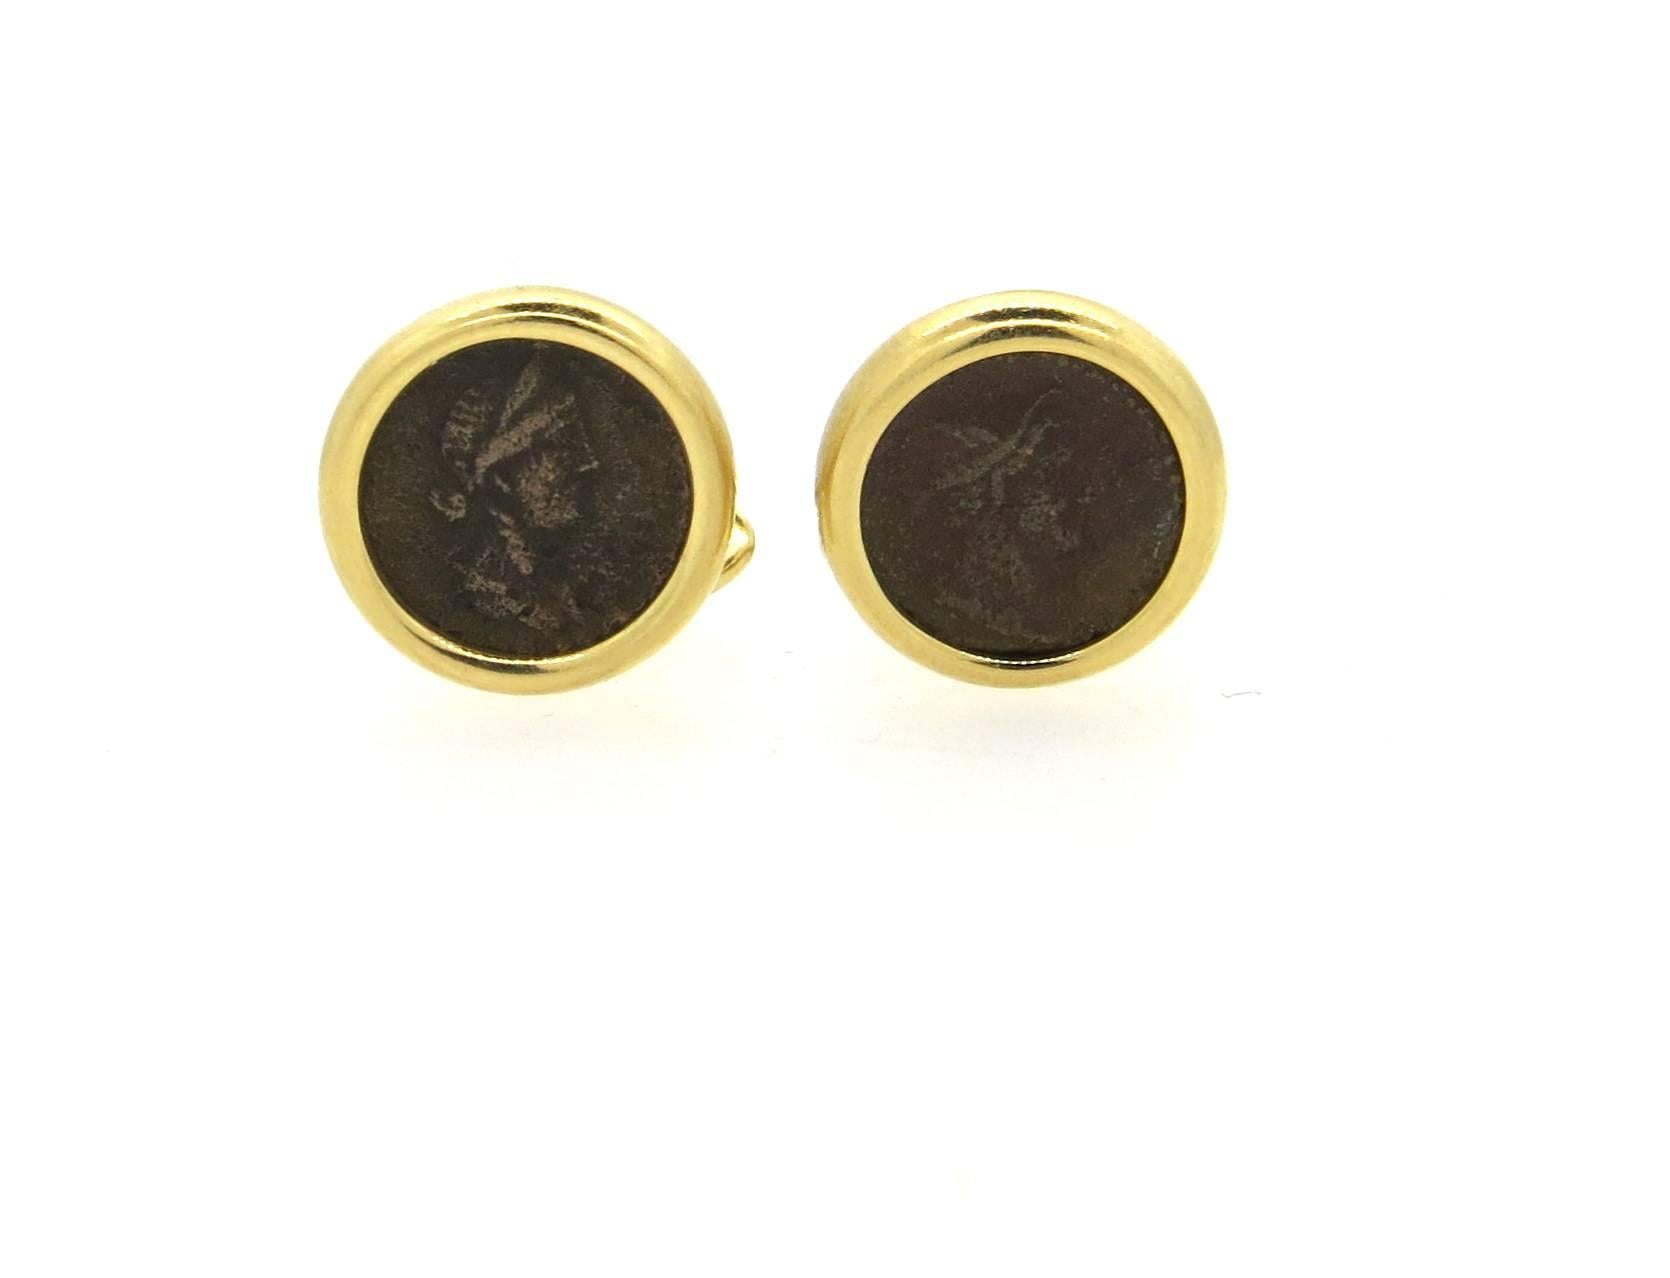 18k yellow gold cufflinks, crafted by Bulgari, set with ancient coins in the center. Cufflink top measures 16mm in diameter. Marked: Bvlgari, 750, made in Italy, Roma-Domitianus, Aug. A.D. 81-96. Weight - 21.5 grams